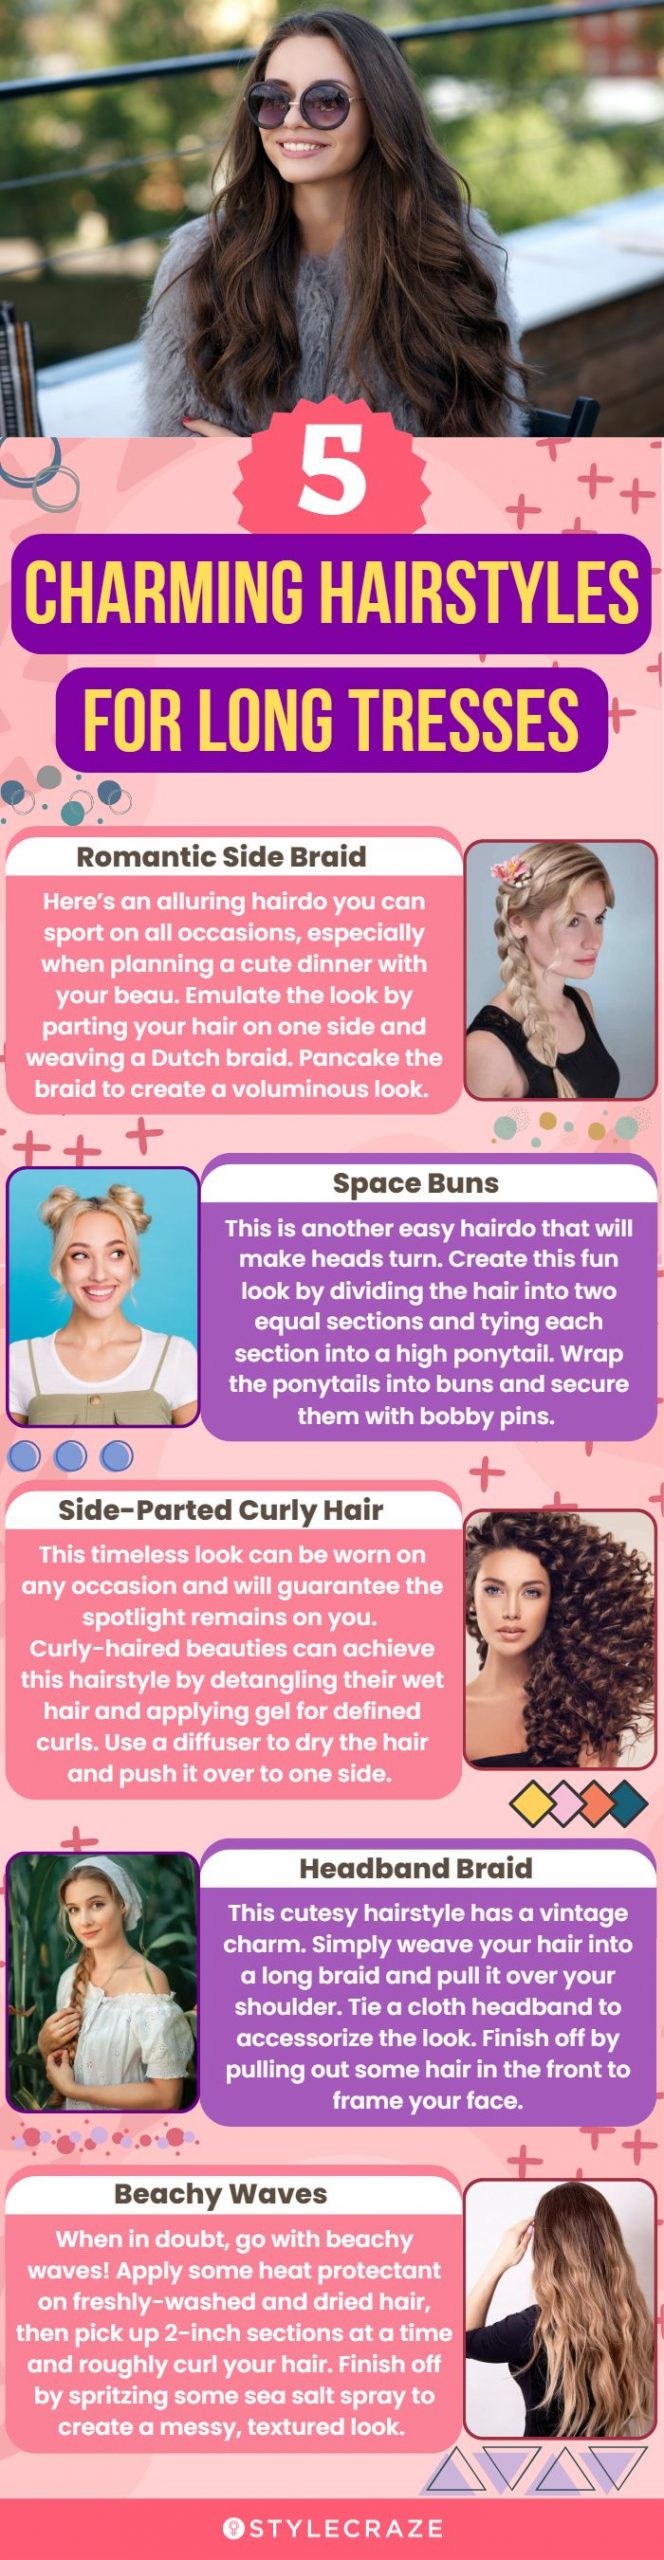 Summer's Best Accessory: Easy Bed Head Hair | All Things Hair US